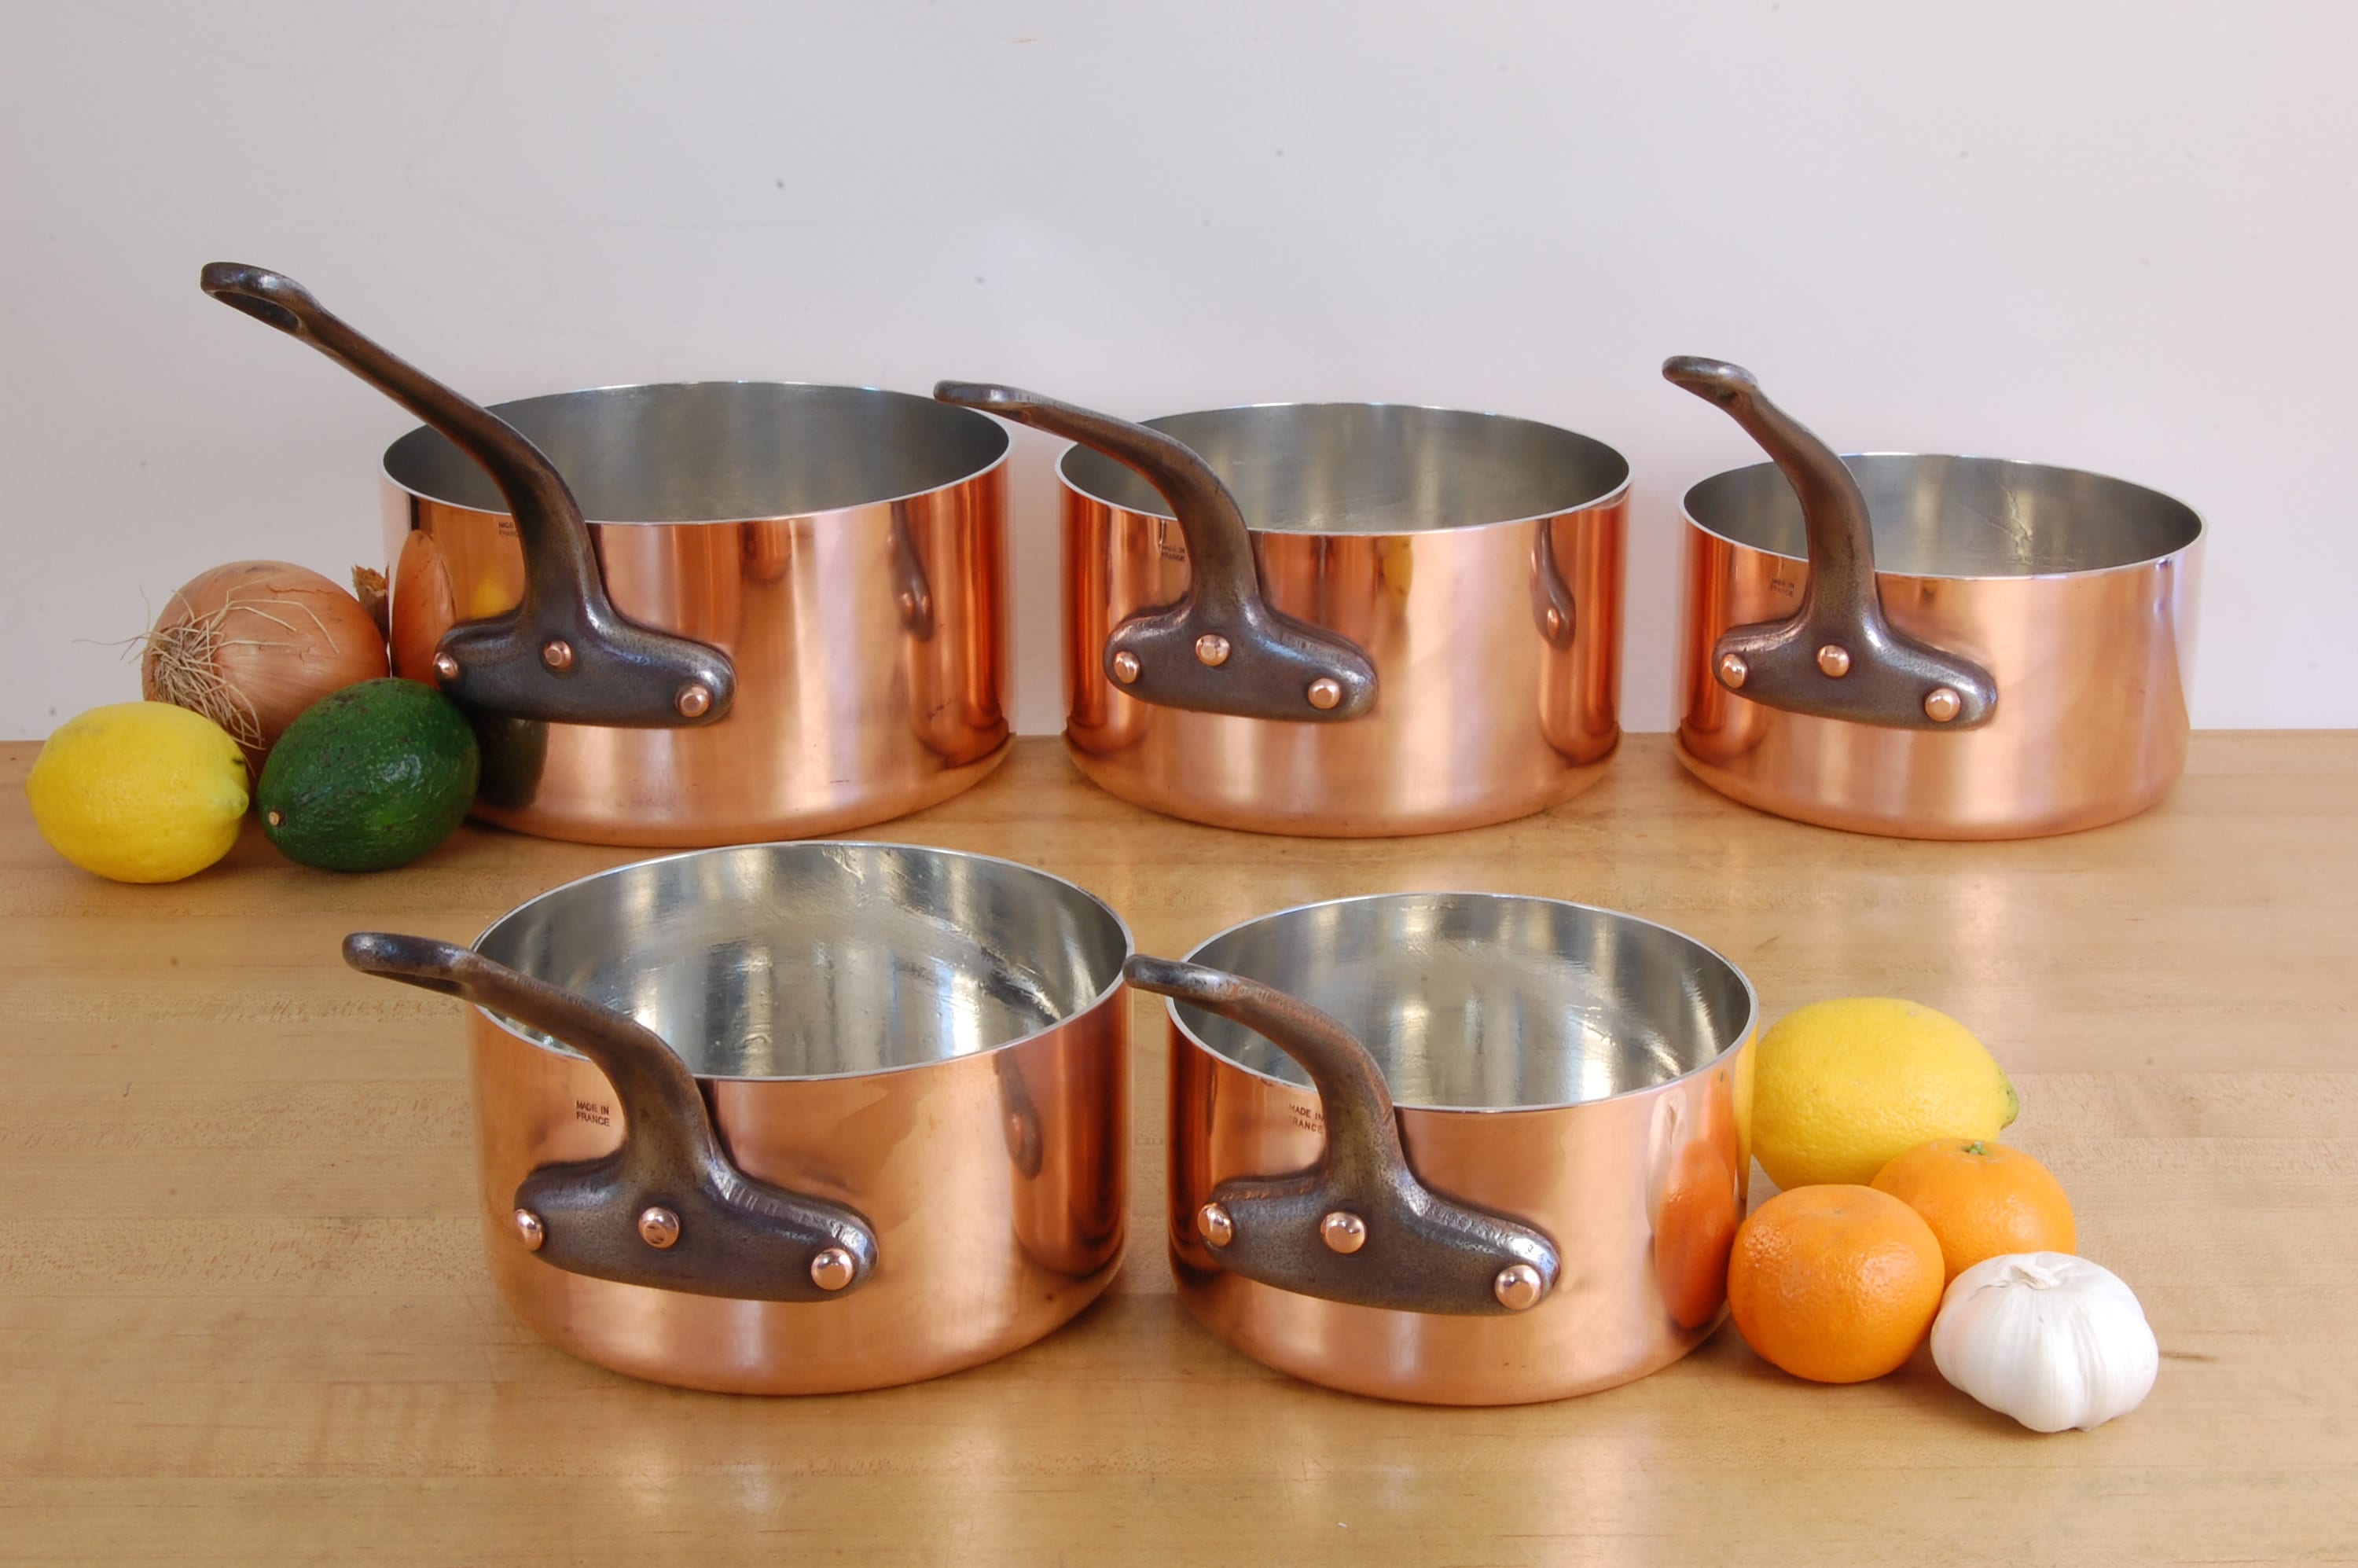 Large Copper Stainless Steel Sauce Pan Pots Stockpots 2.9mm Thick